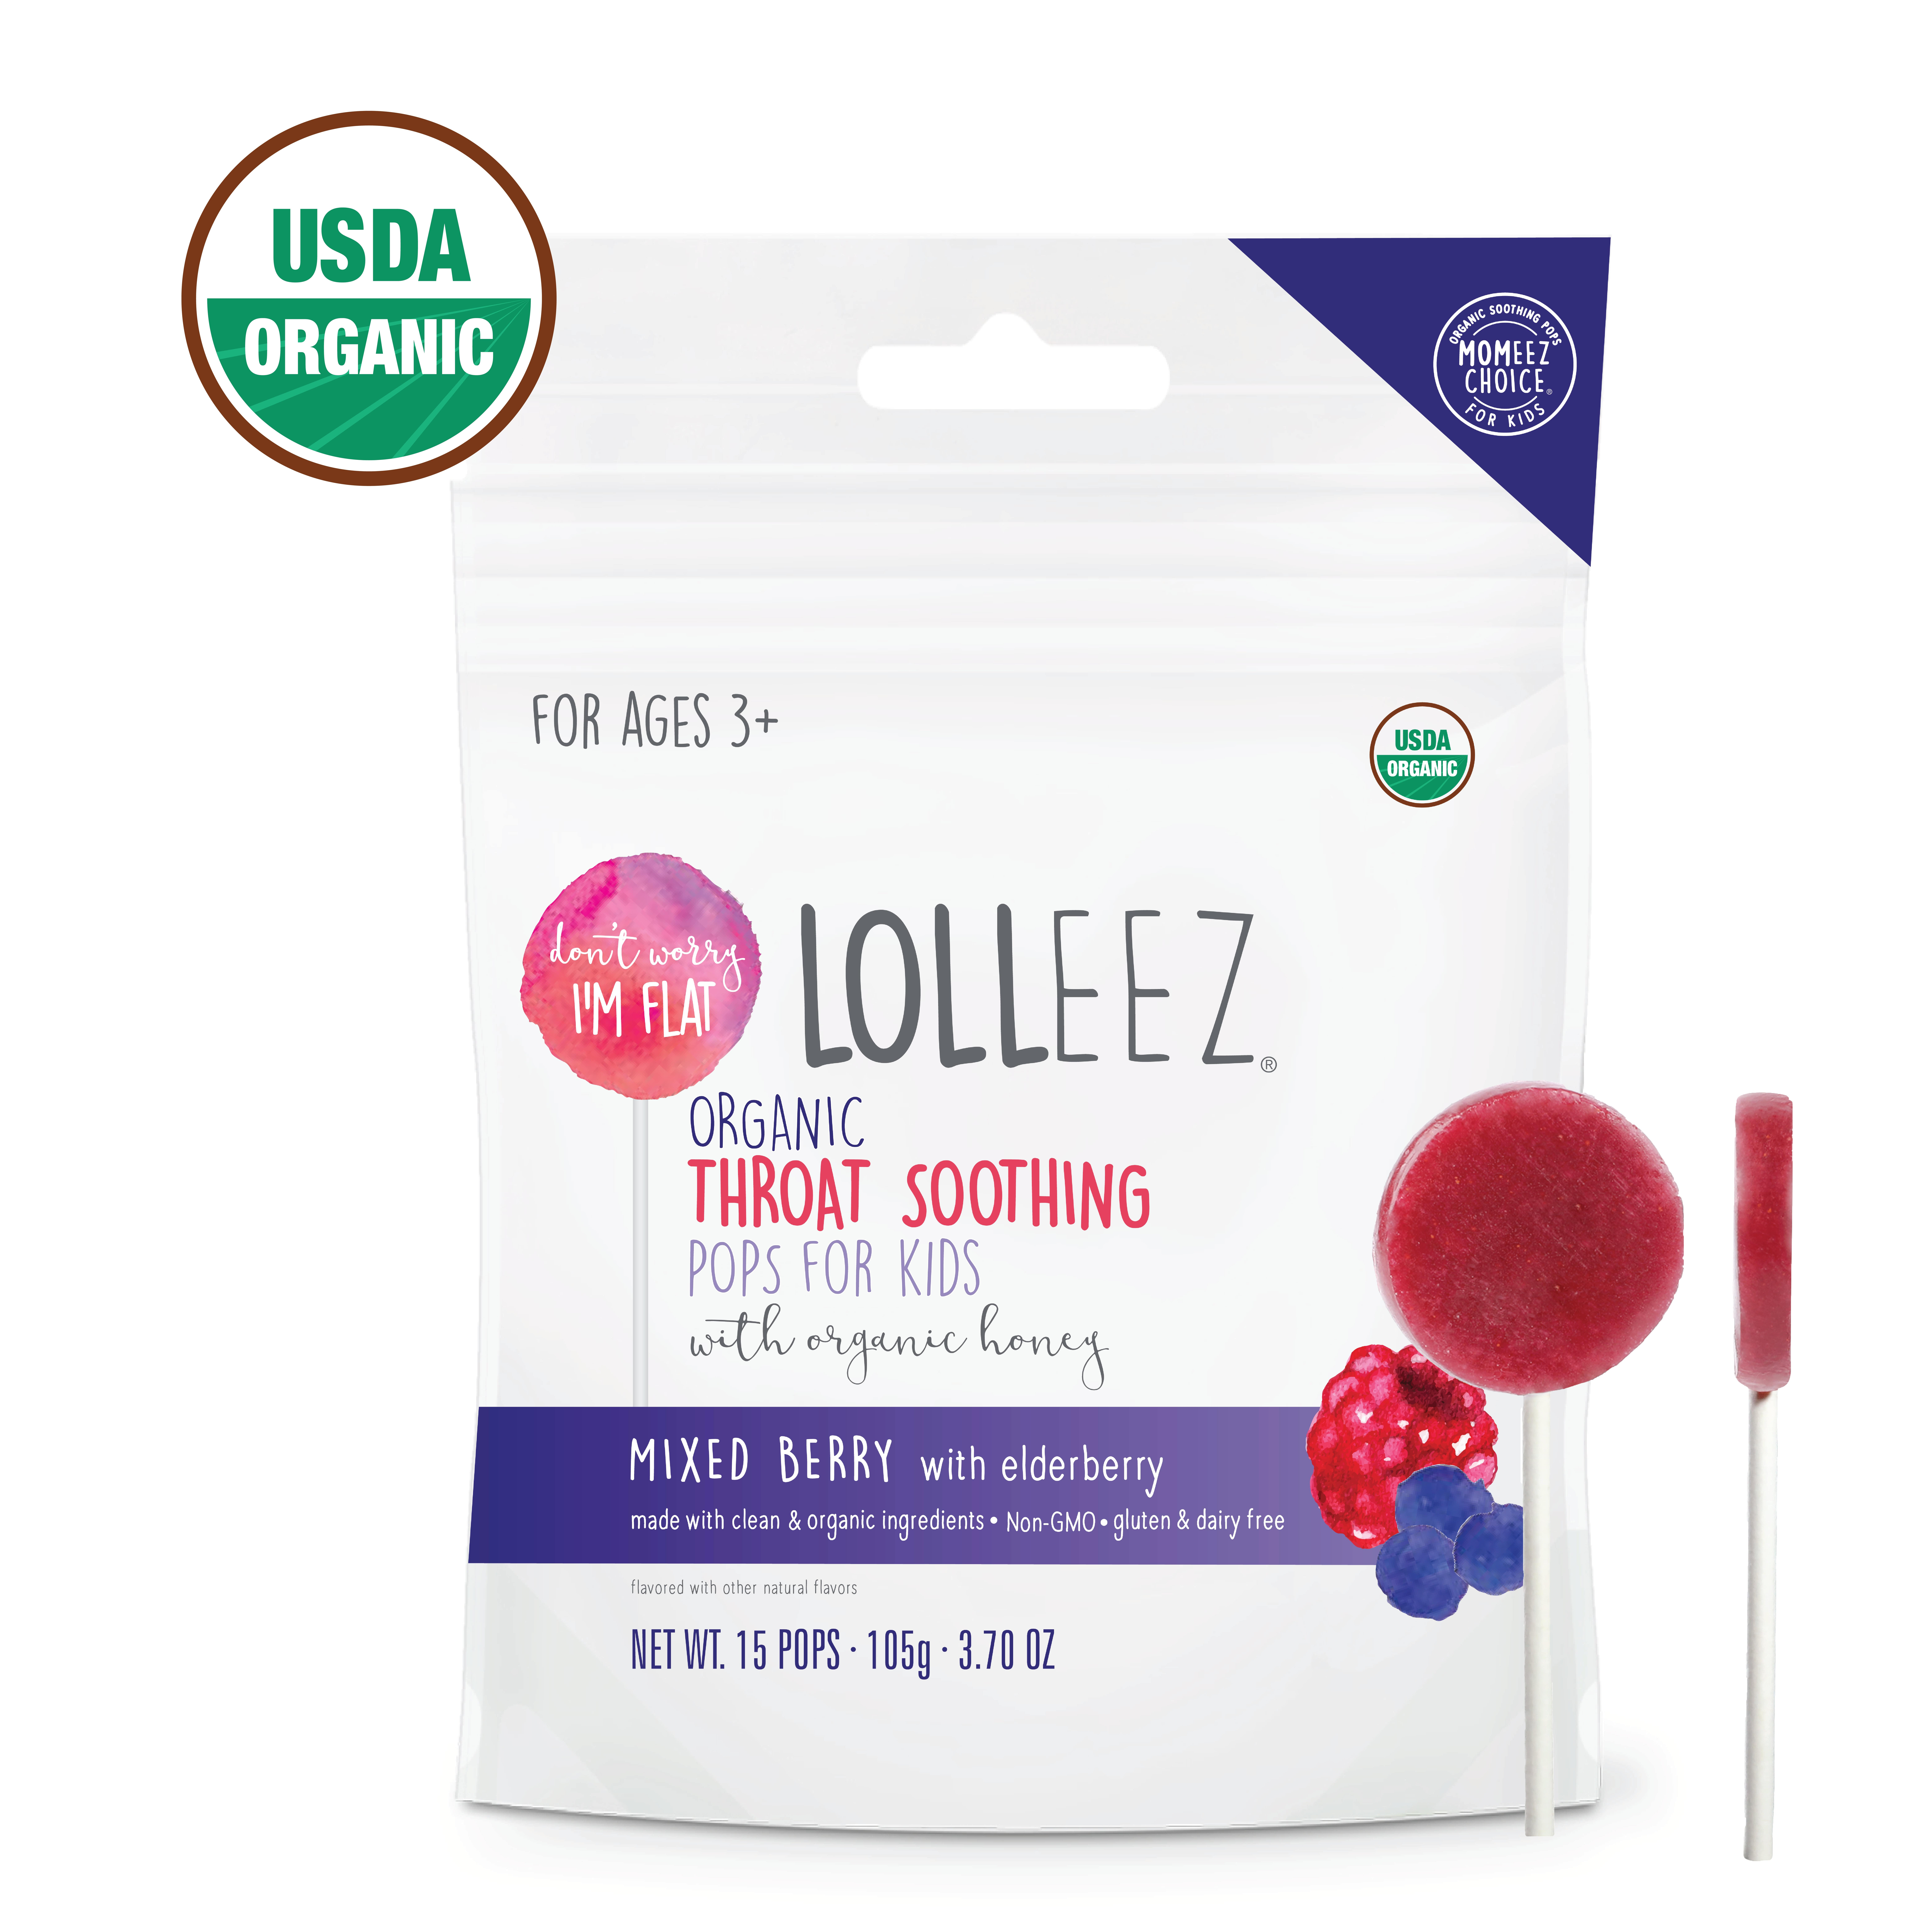 Lolleez Organic Throat Soothing Lollipops for Kids, Mixed Berry, 15 CT